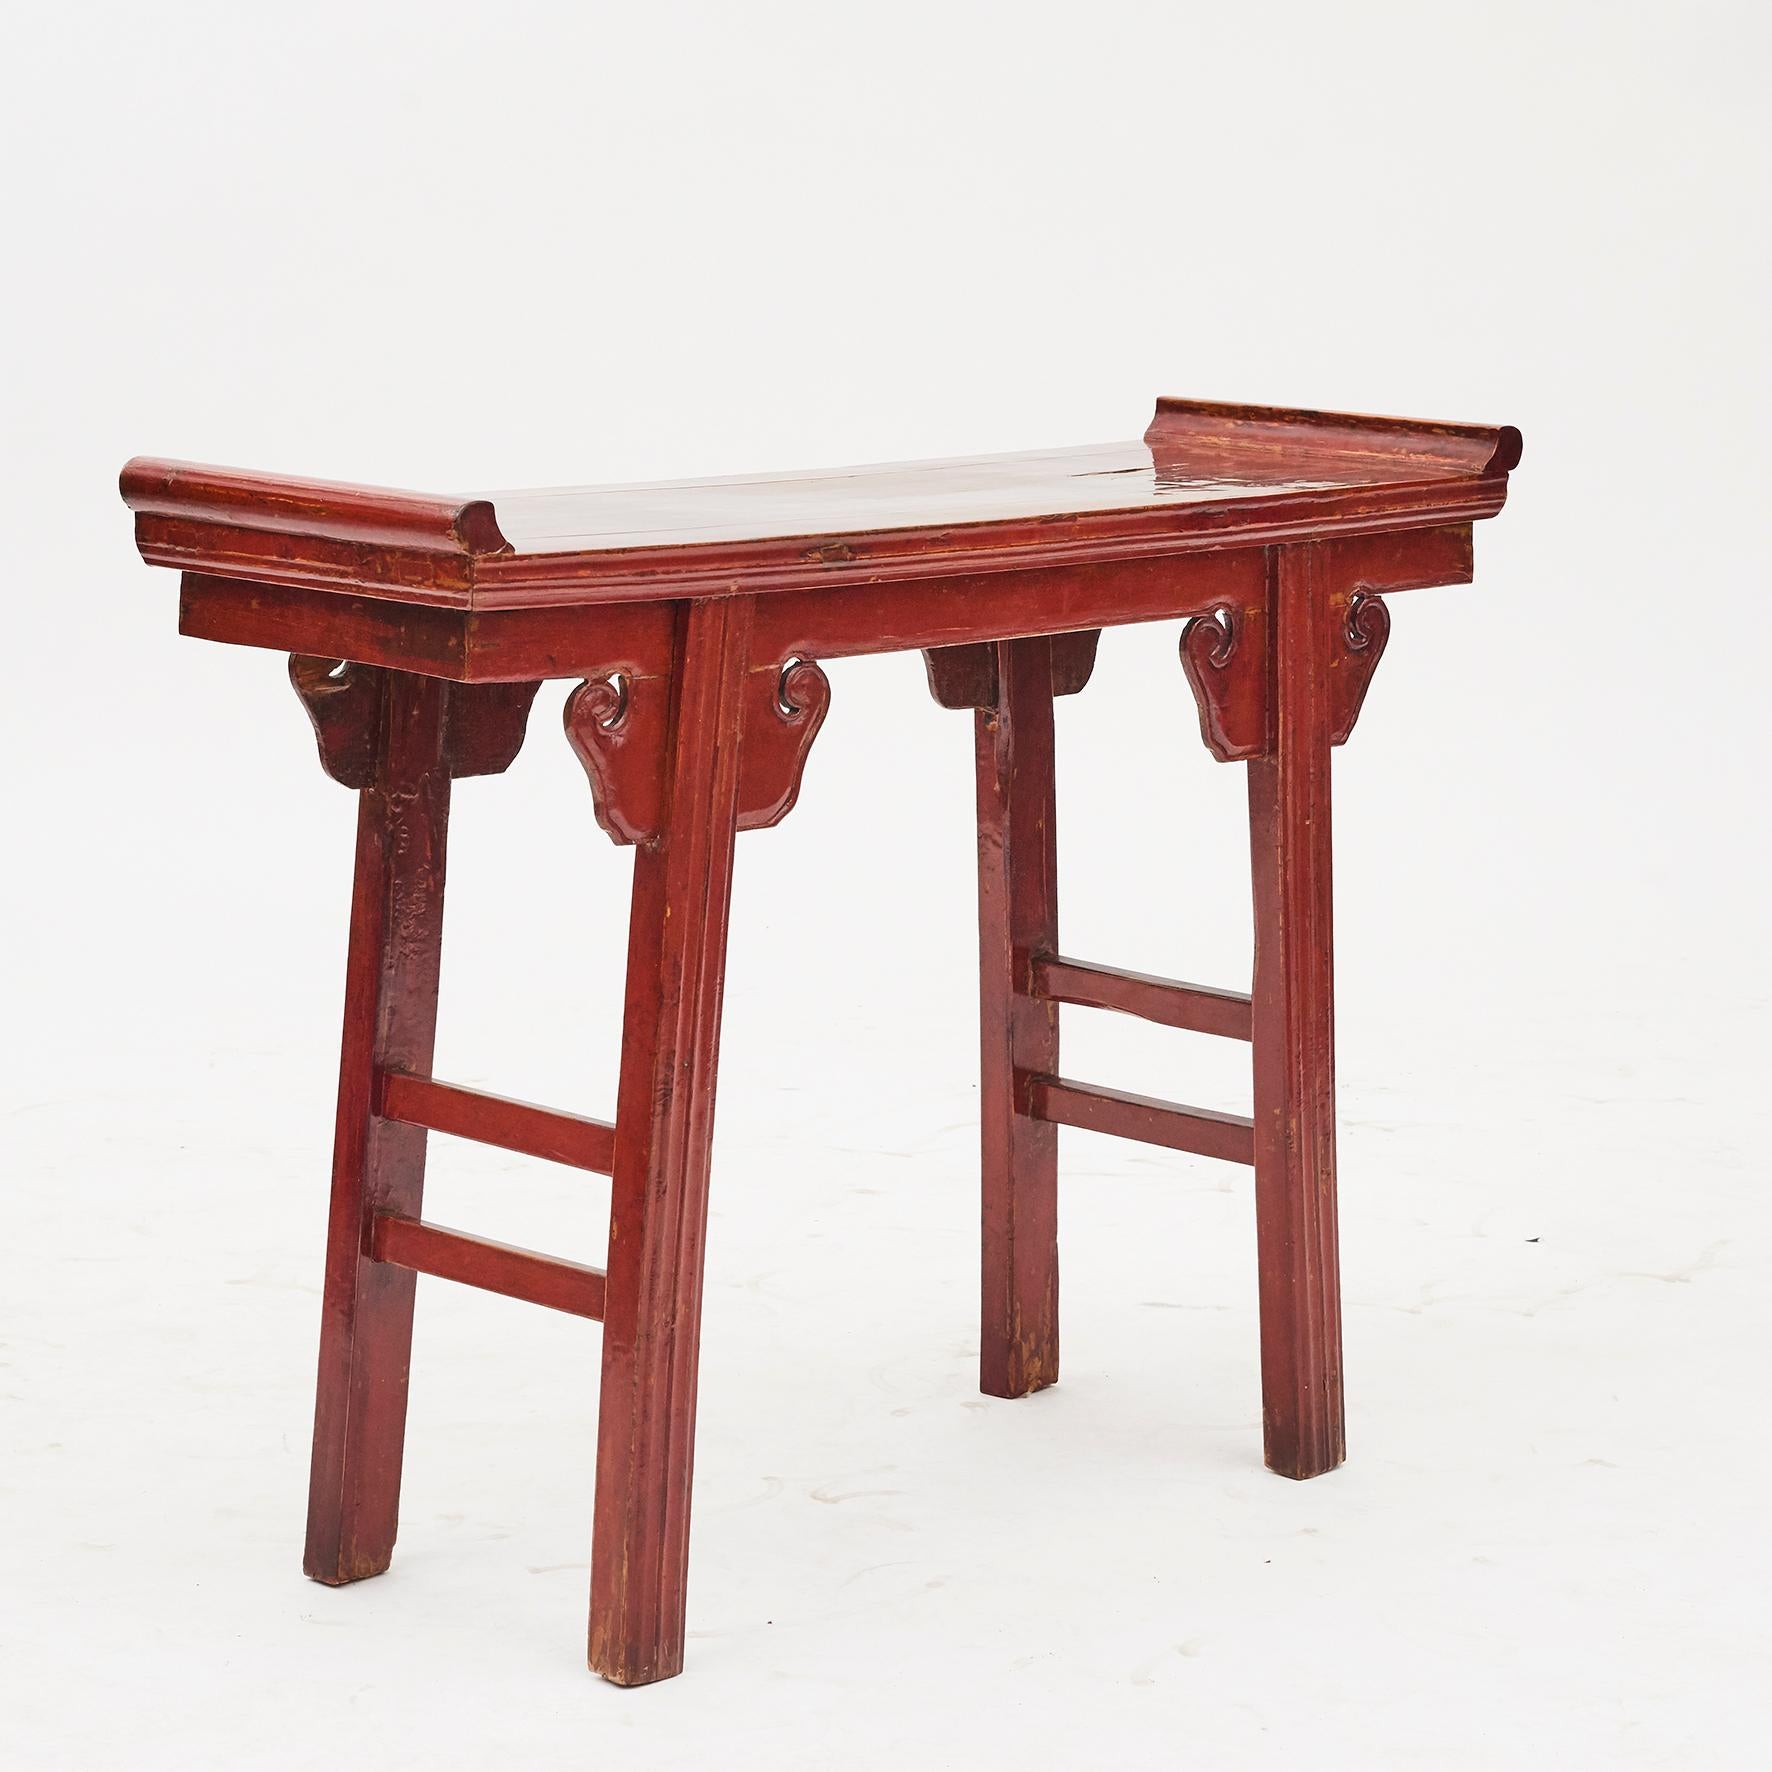 Small alter / communion table in peach wood from the Zhejiang Province of China. Original condition with red lacquer with age-related patina.

Ming style, mid-19th century.